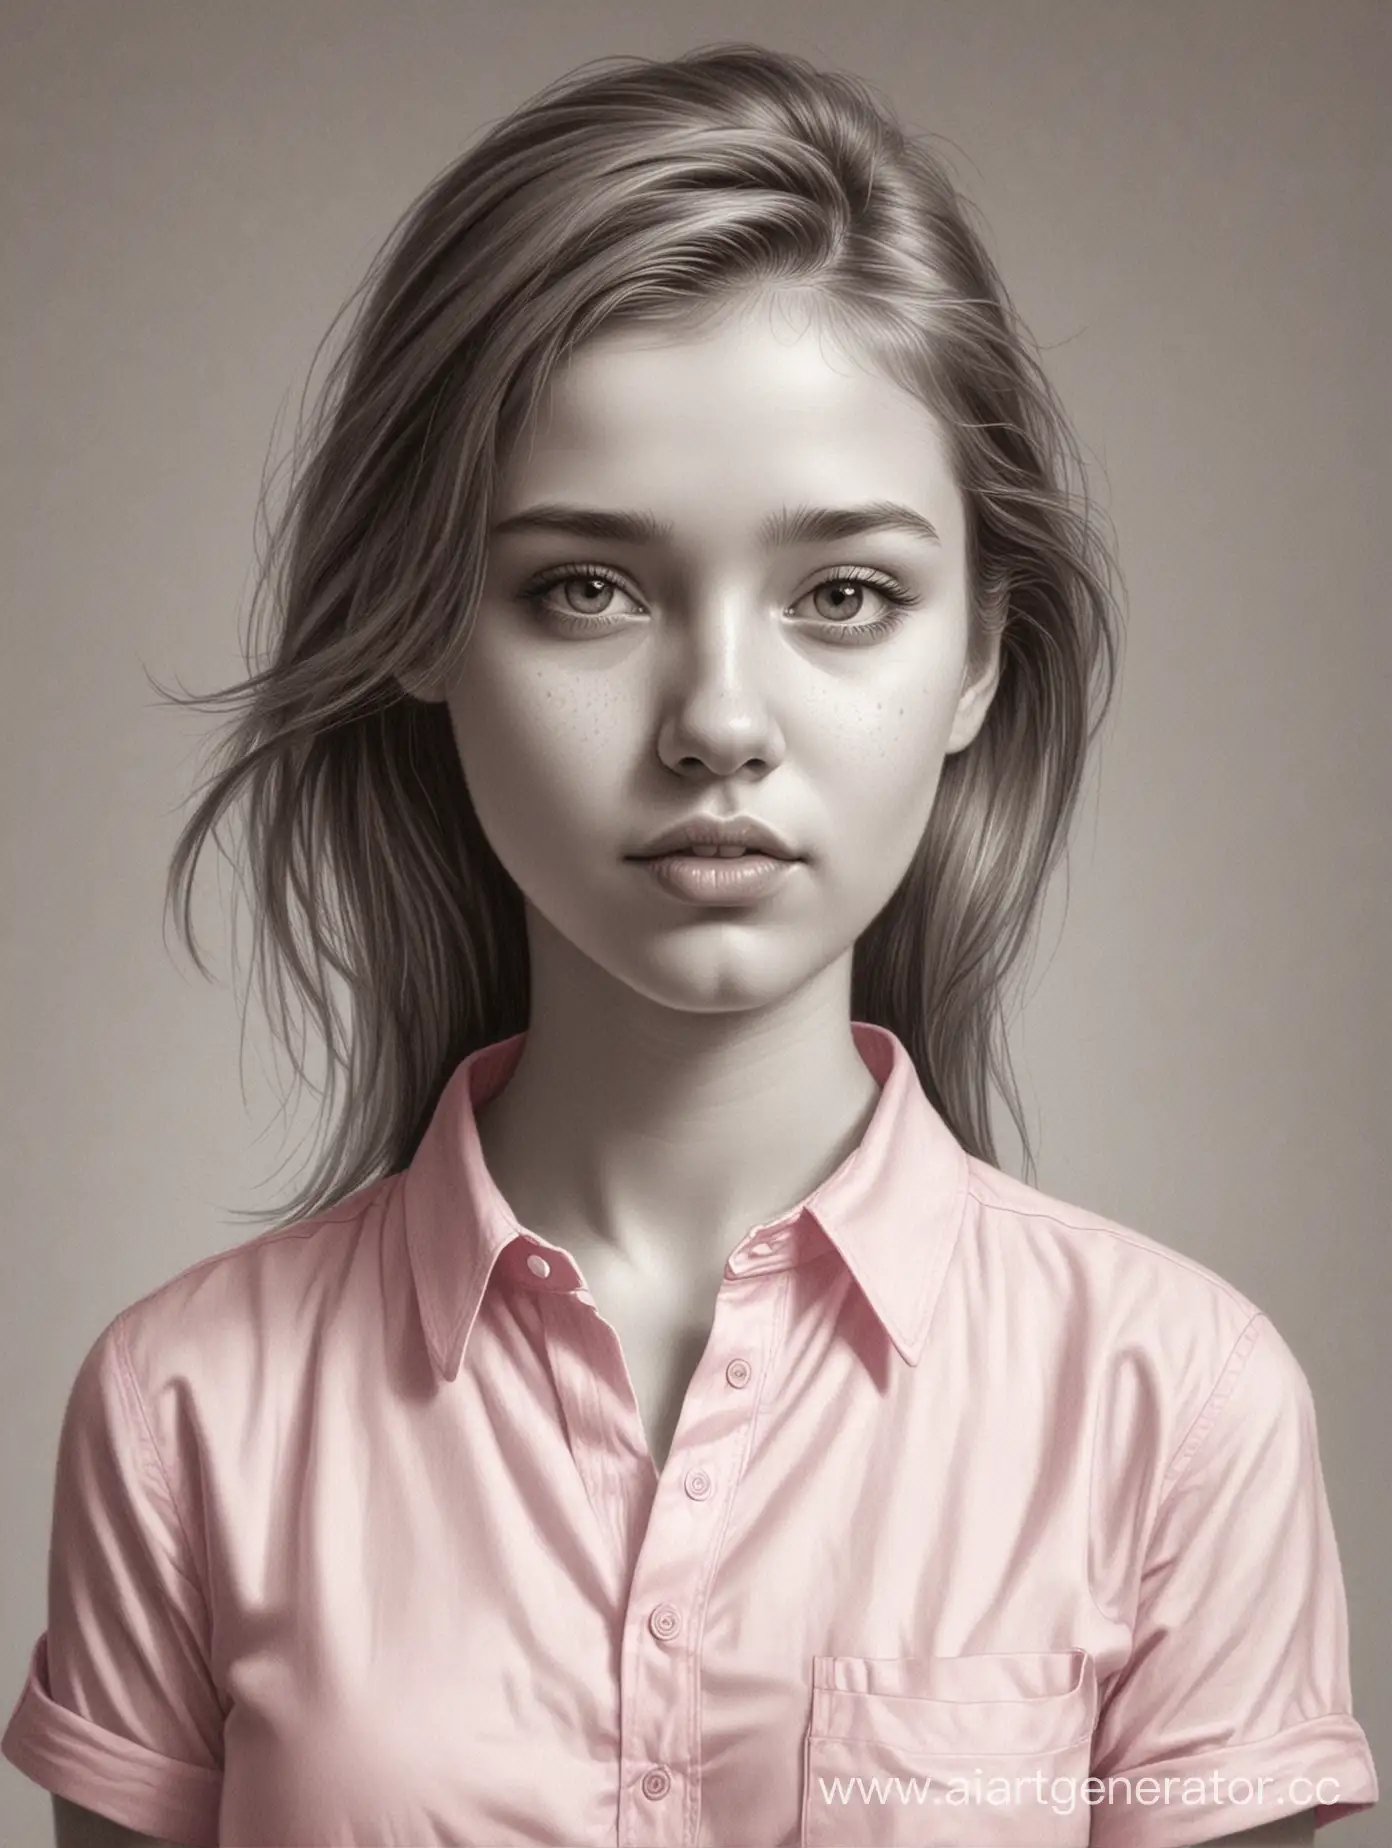 Adorable-Girl-in-a-SketchLike-Pink-Shirt